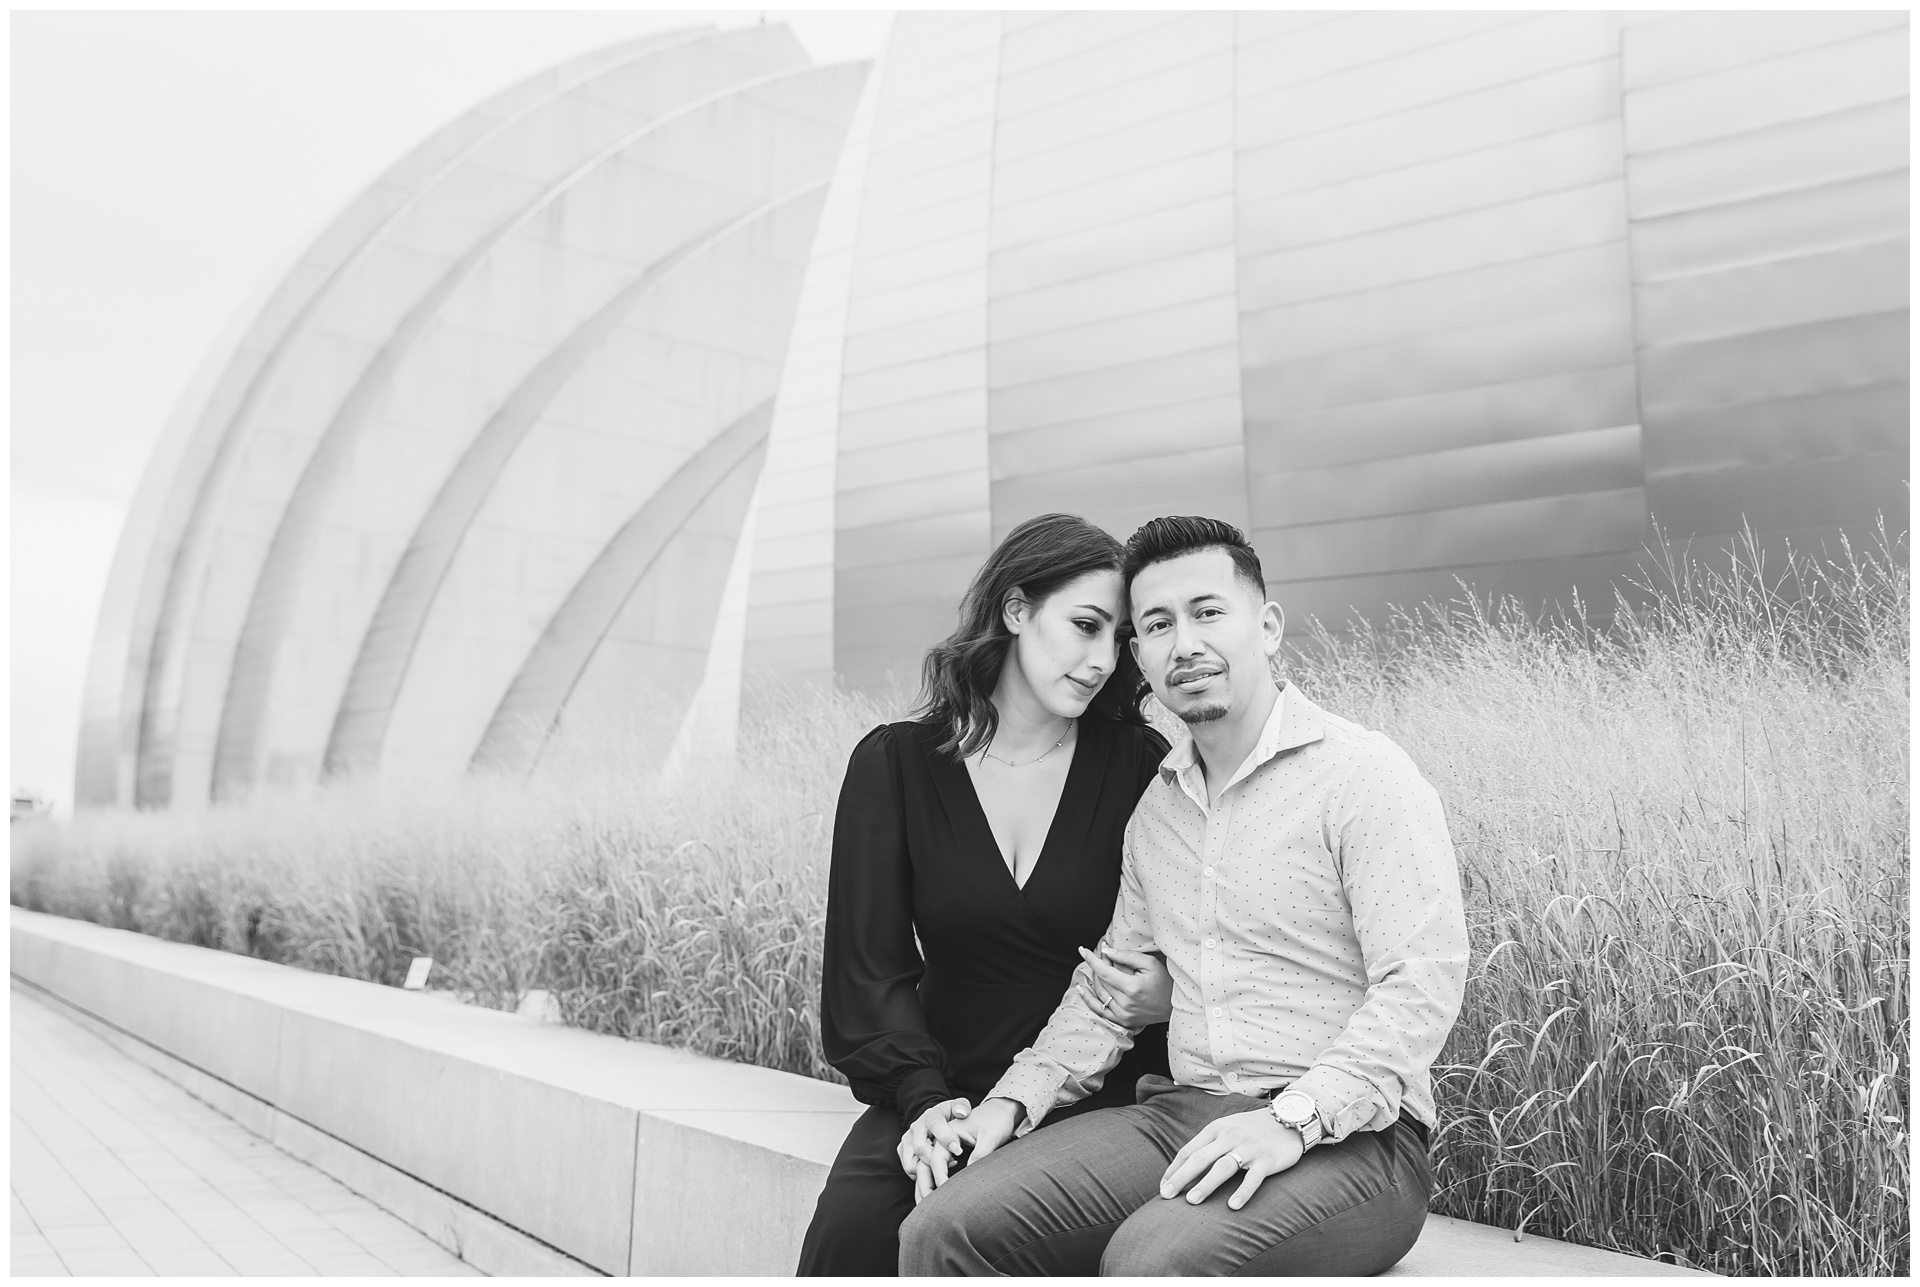 Engagement photography at Kauffman Center for the Performing Arts by Kansas City wedding photographers Wisdom-Watson Weddings.